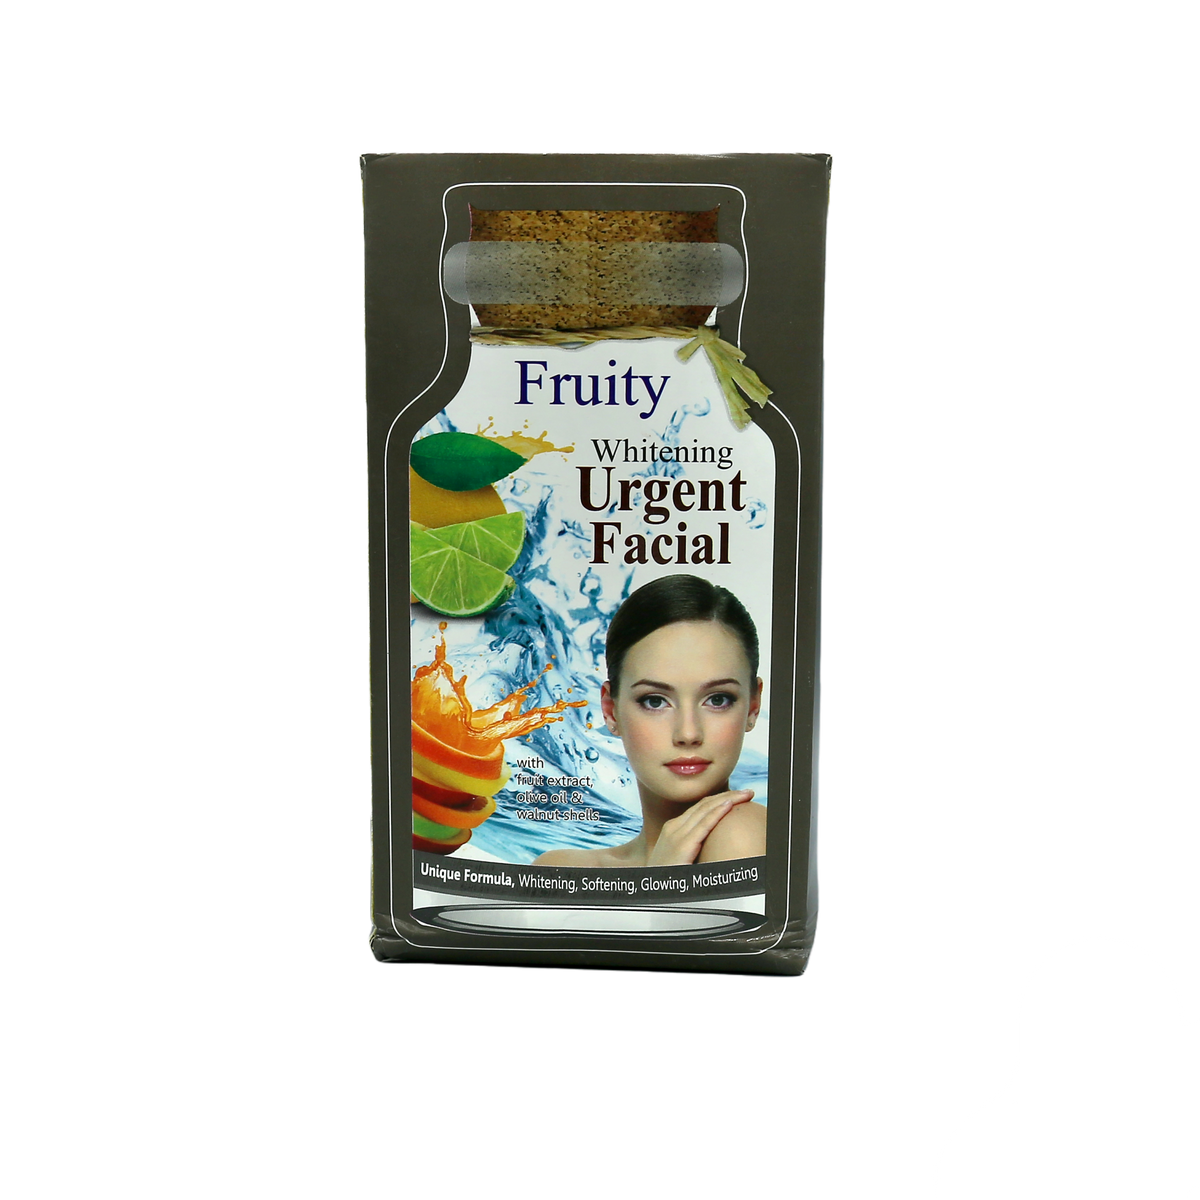 Fruity Whitening Urgent Facial With Fruit Extract Olive Oil &amp; Walnut Shells 25g freeshipping - lasertag.pk